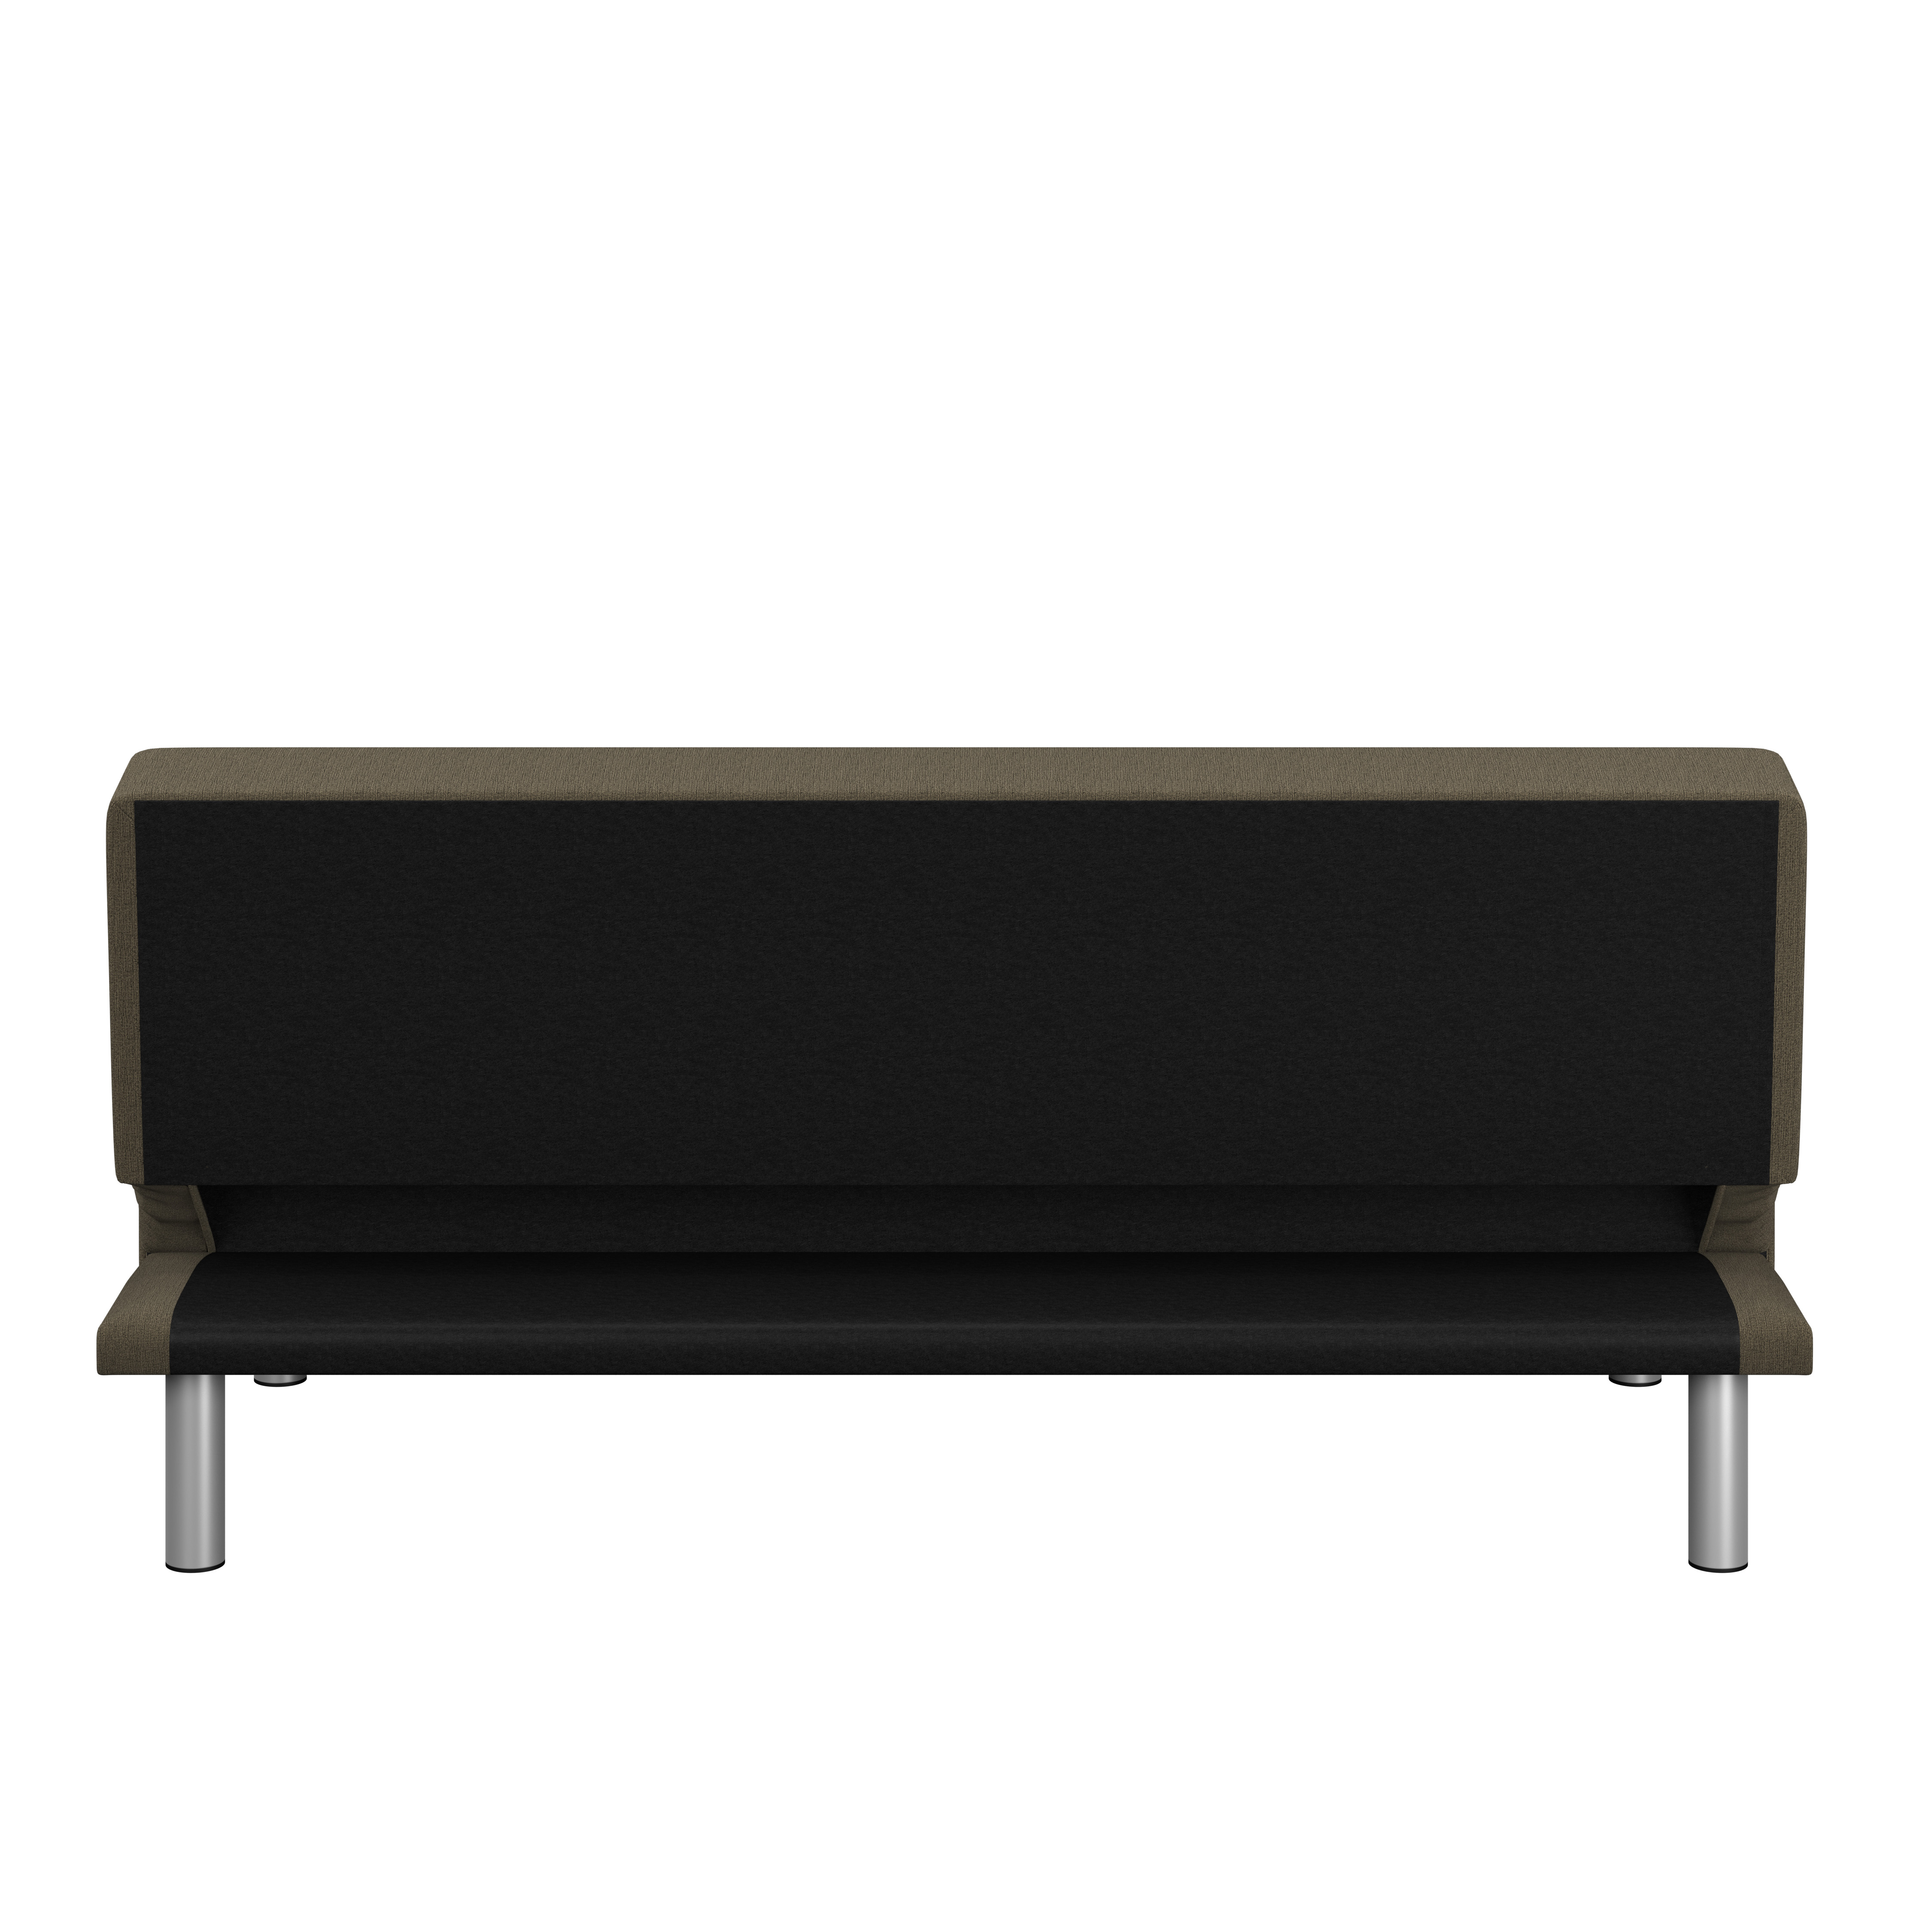 Serta Canon Futon with Power, Brown Fabric - image 2 of 15